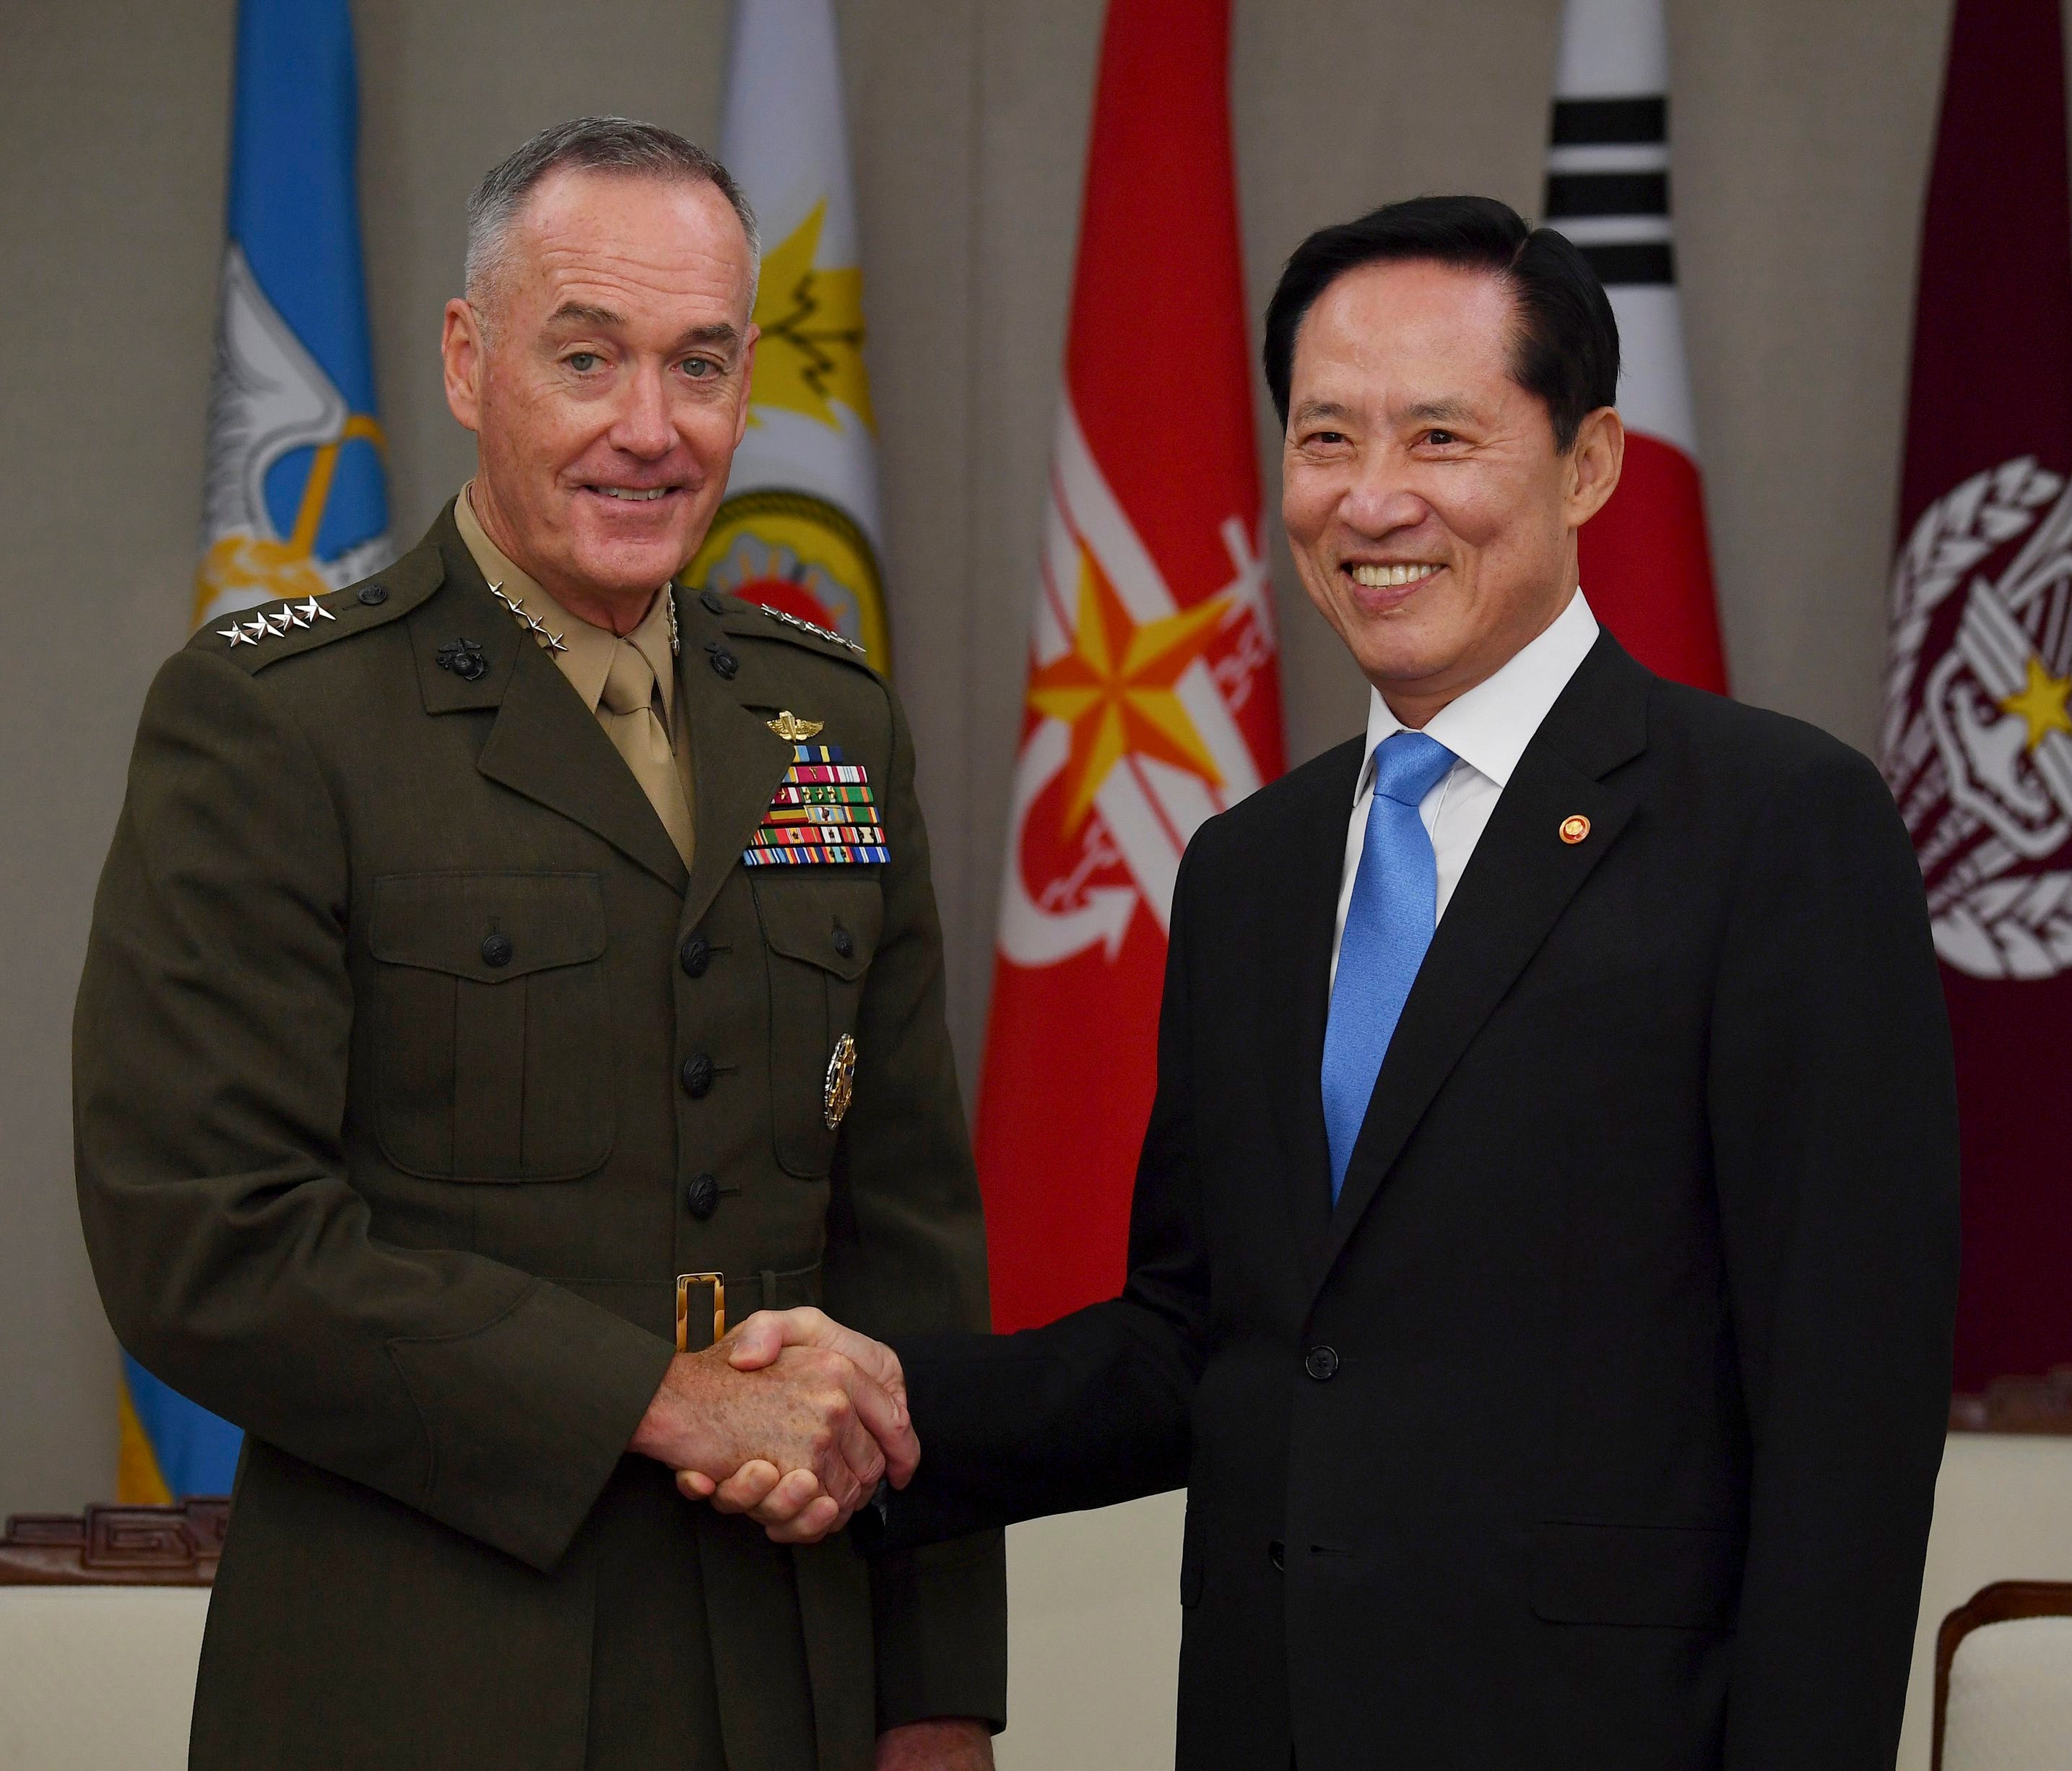 Marine Corps General Joseph Dunford, chairman of the Joint Chiefs of Staff, shakes hands with South Korean Defense Minister Song Young-Moo.